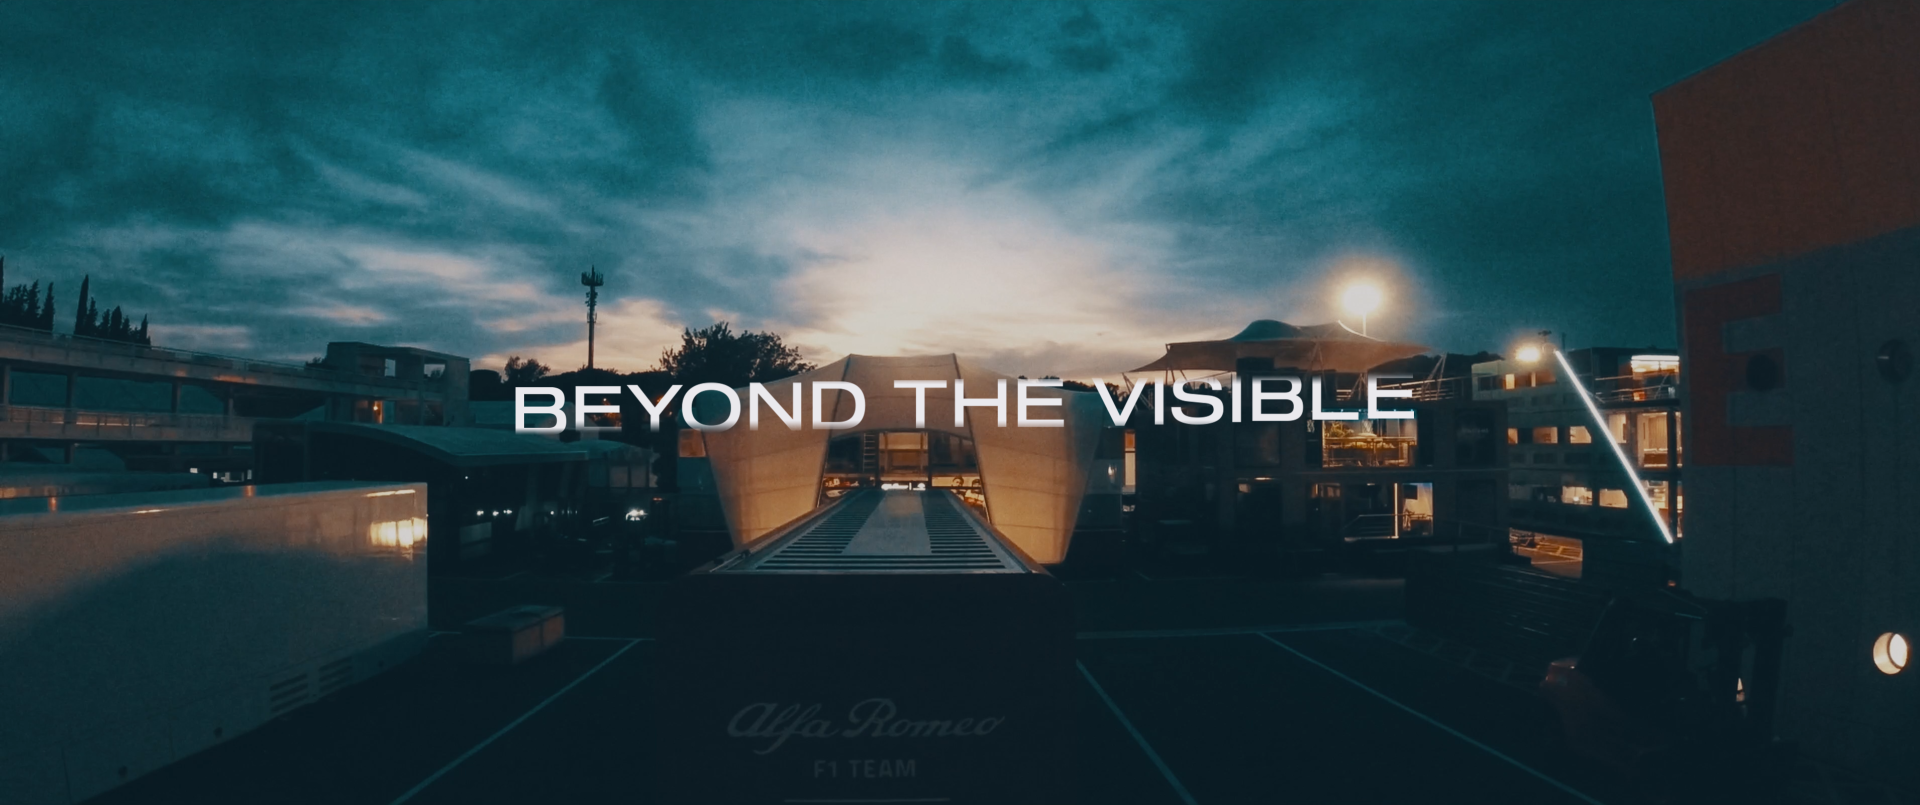 Beyond the Visible